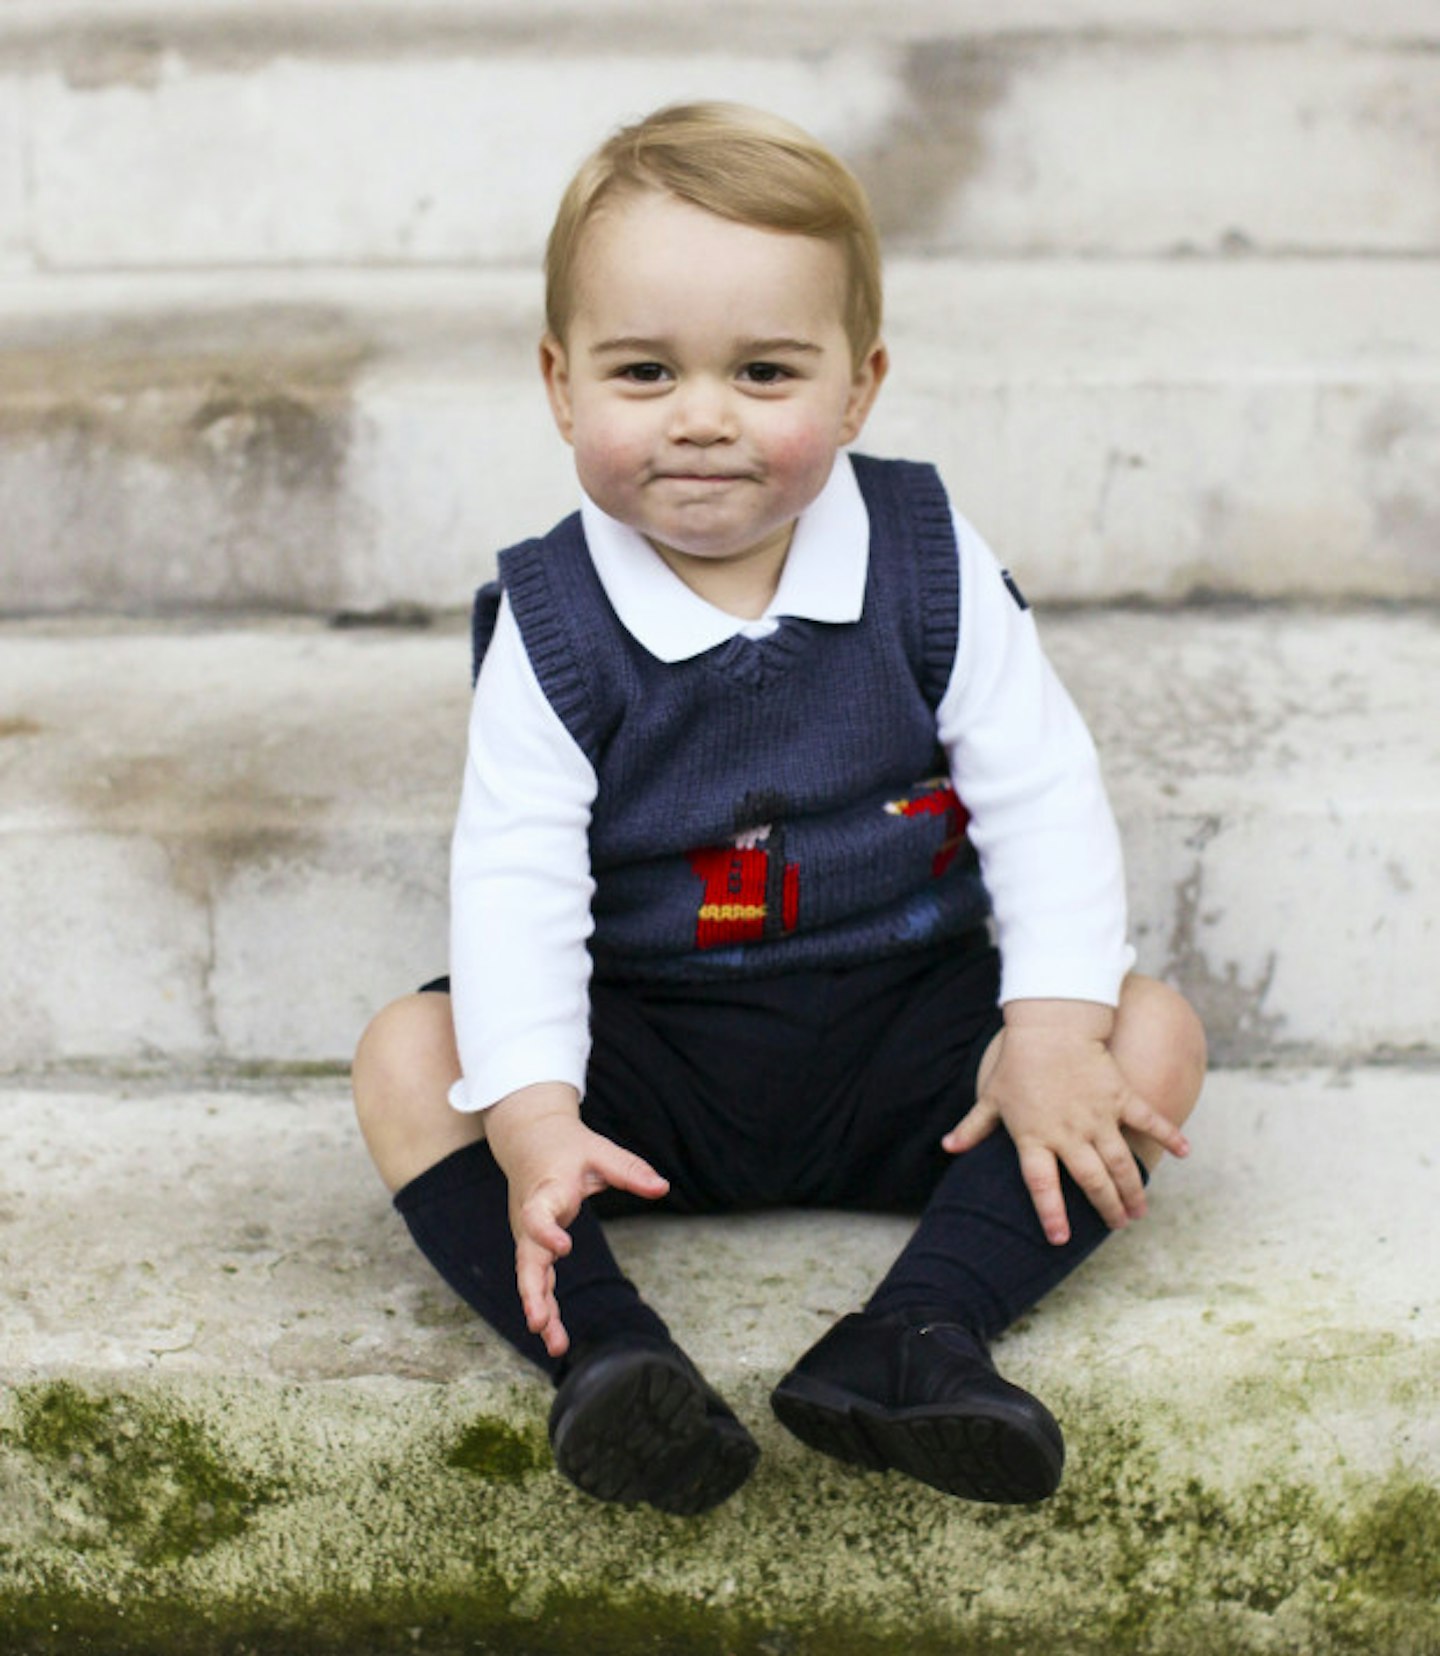 The cutest Prince around town, Prince George.